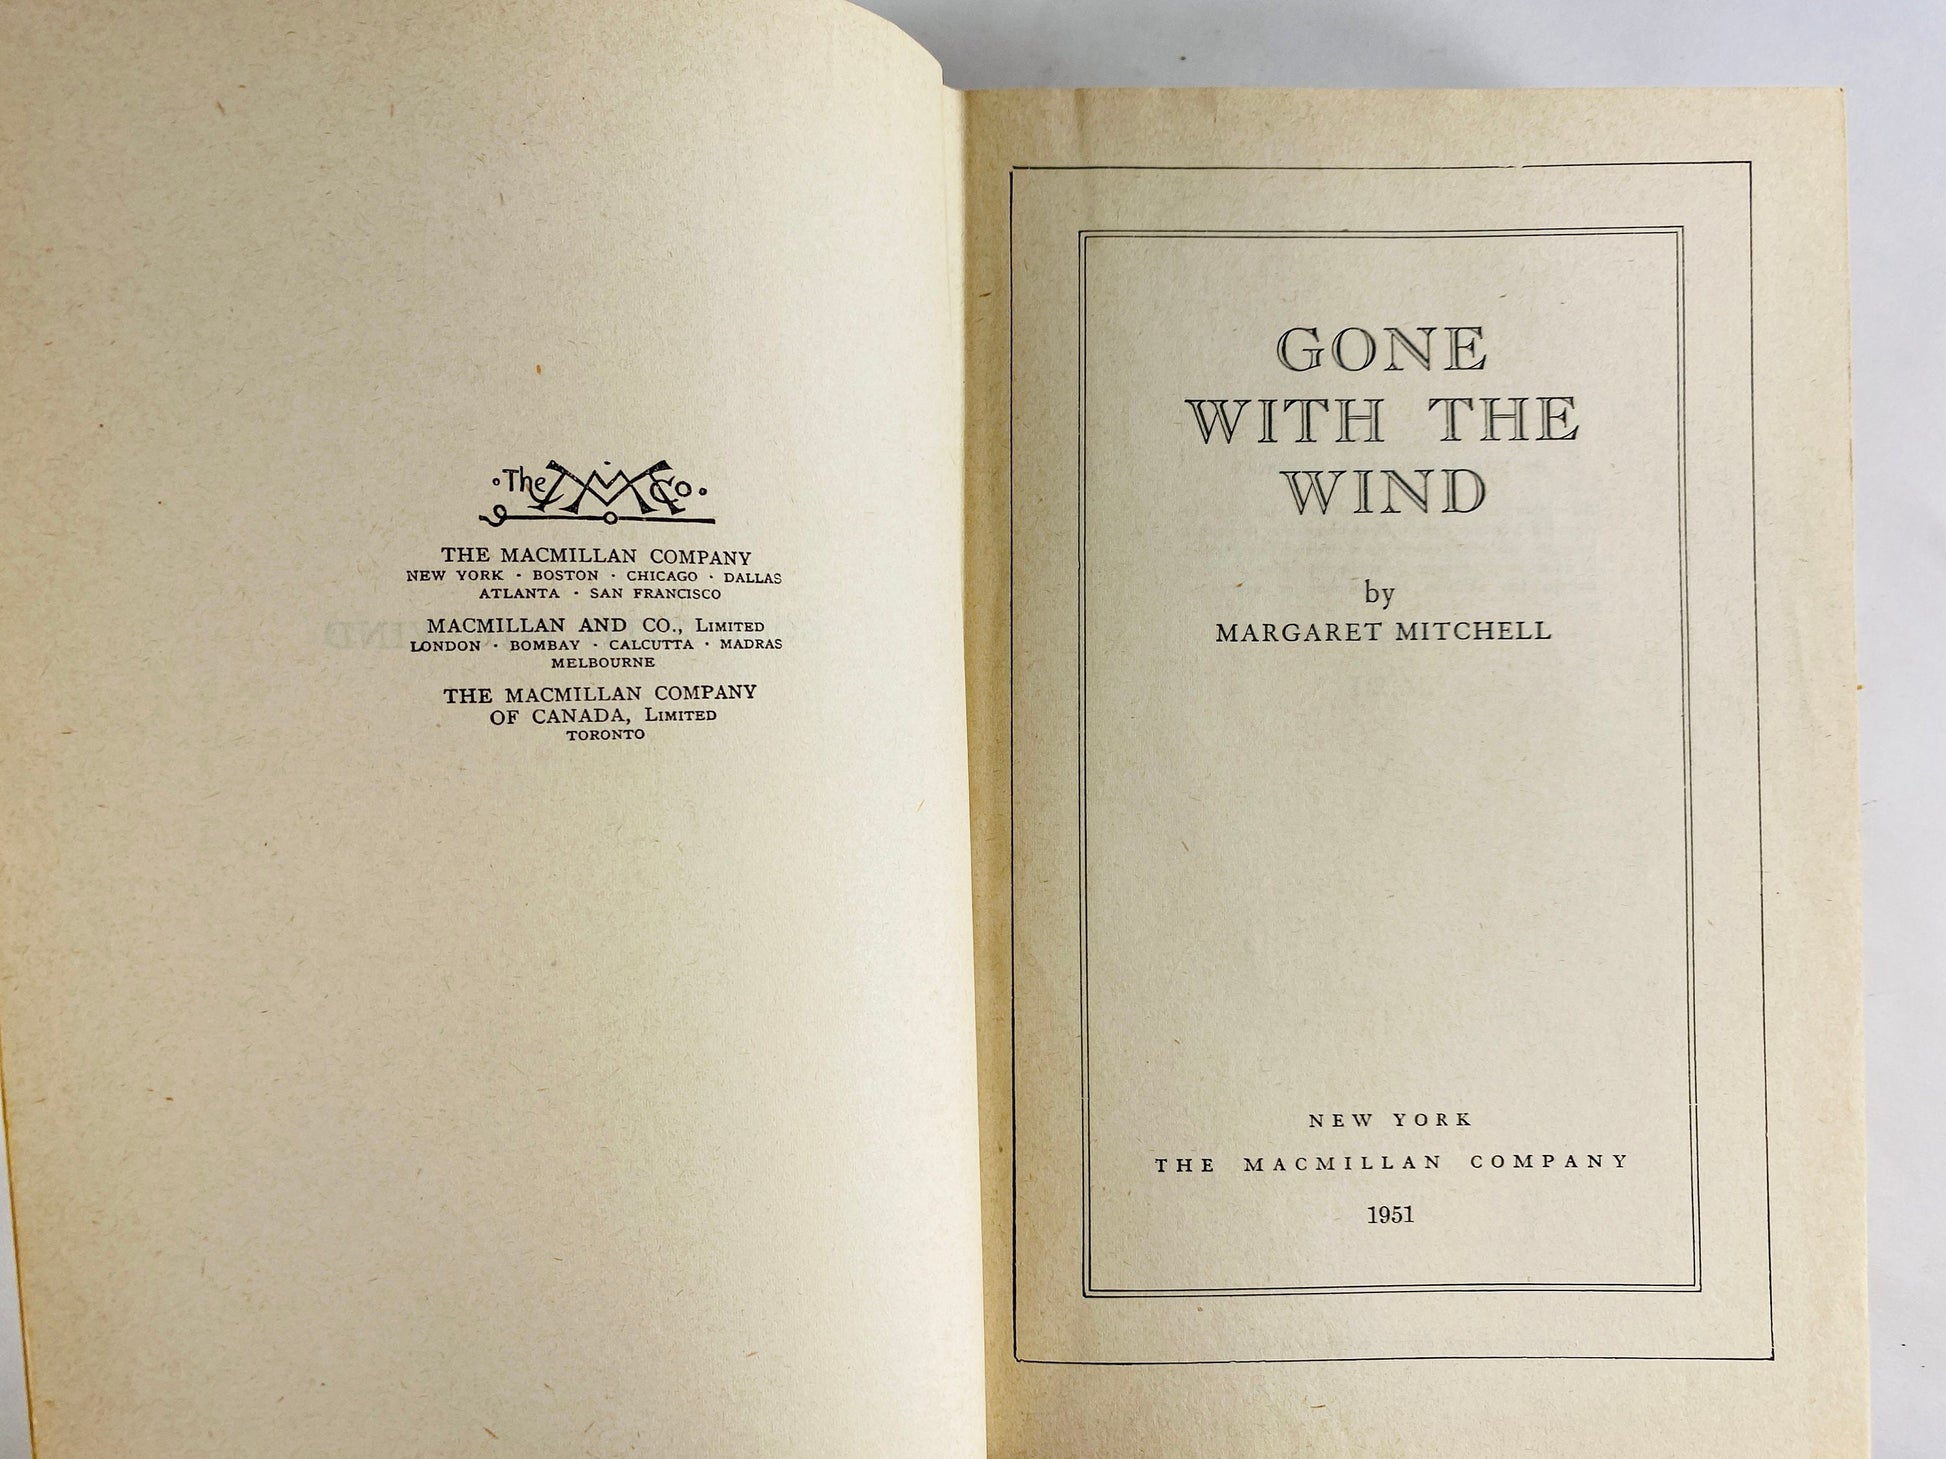 1951 Gone with the Wind by Margaret Mitchell vintage book EARLY PRINTING. Epic historical romance Scarlett O'hara. Red home decor